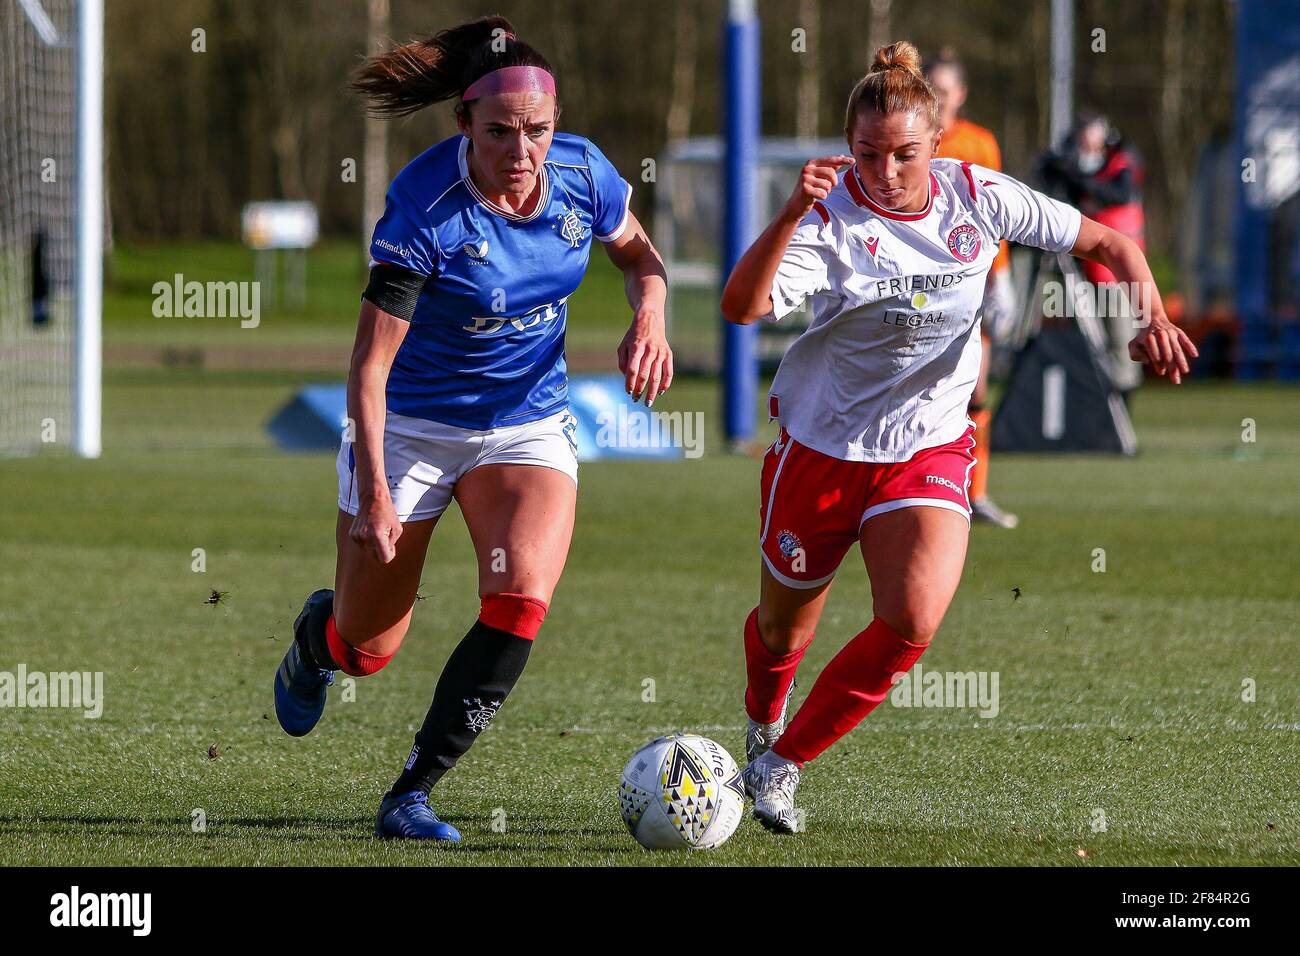 Glasgow, UK. 11th Apr, 2021. Kirsten Reilly (#8) of Rangers Women FC & Michaela McAlonie (#7) of Spartans FC Women chase a loose ball during the Scottish Building Society SWPL1 Fixture Rangers FC vs Spartans FC at Rangers Training Centre, Glasgow, 11/04/2021 | Images courtesy of www.collargeimages.co.uk Credit: Colin Poultney/Alamy Live News Stock Photo